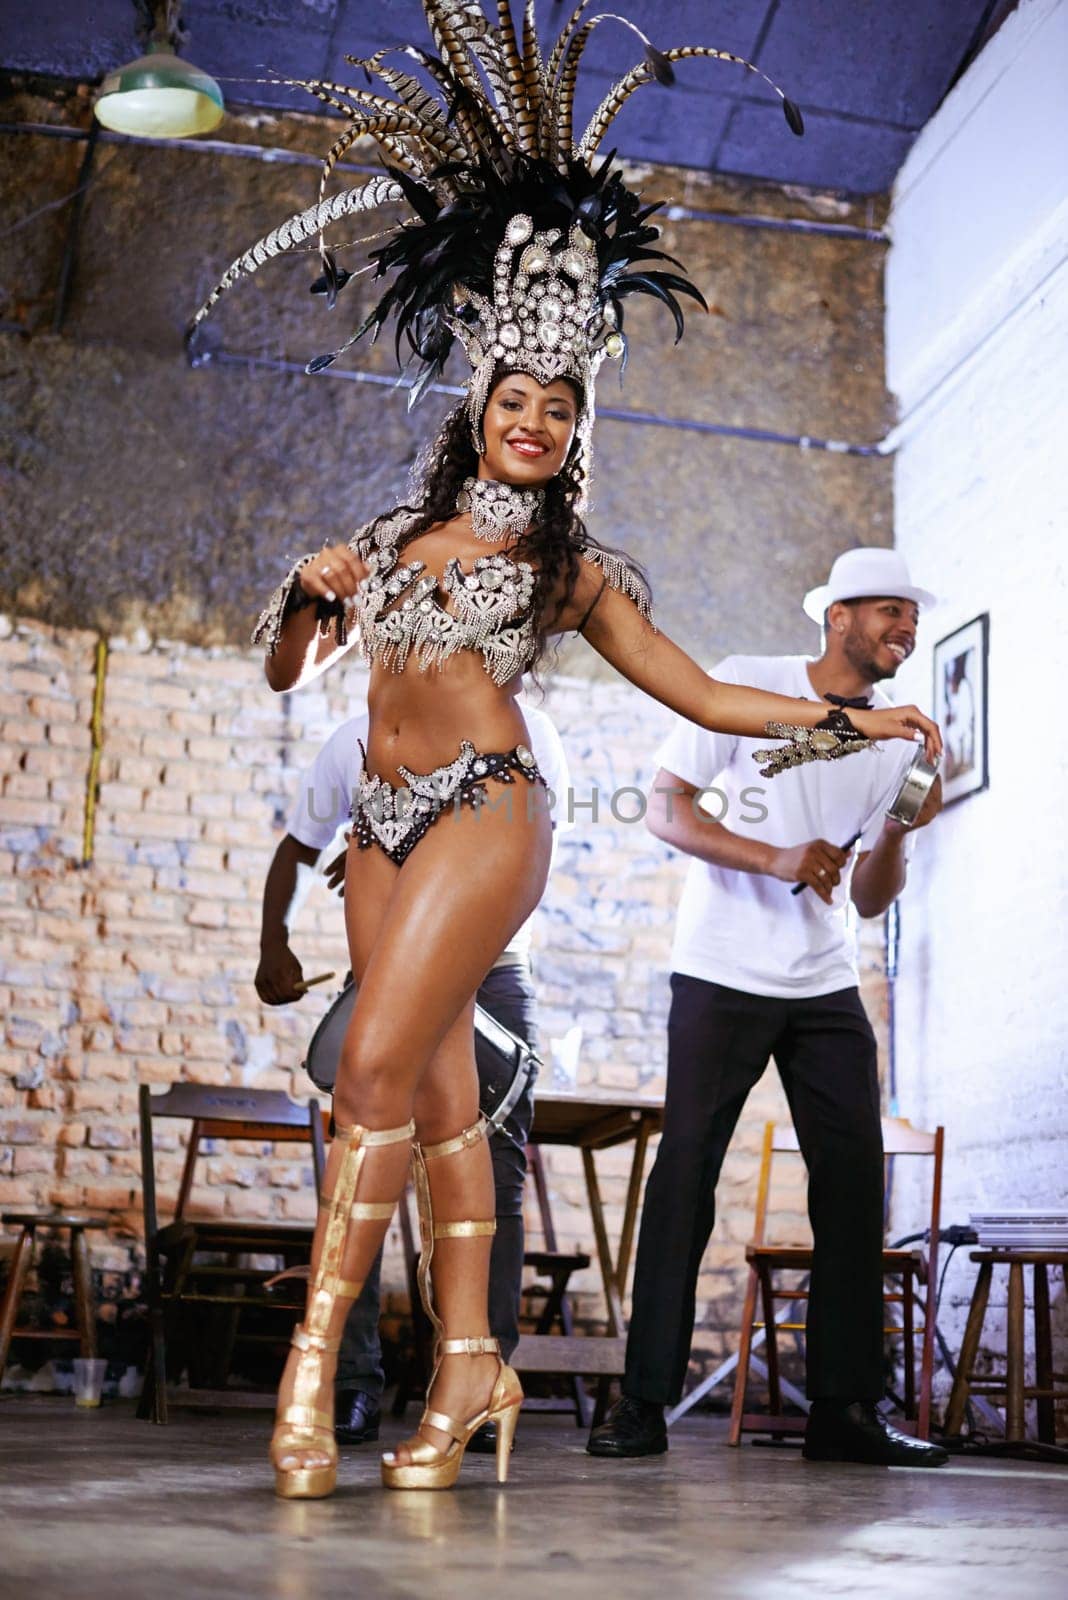 Women, happy and samba dancer for performance with smile or talent, fashion and drums for music in Brazil. Female person, costume and band at event or show for entertainment, celebration and heritage by YuriArcurs